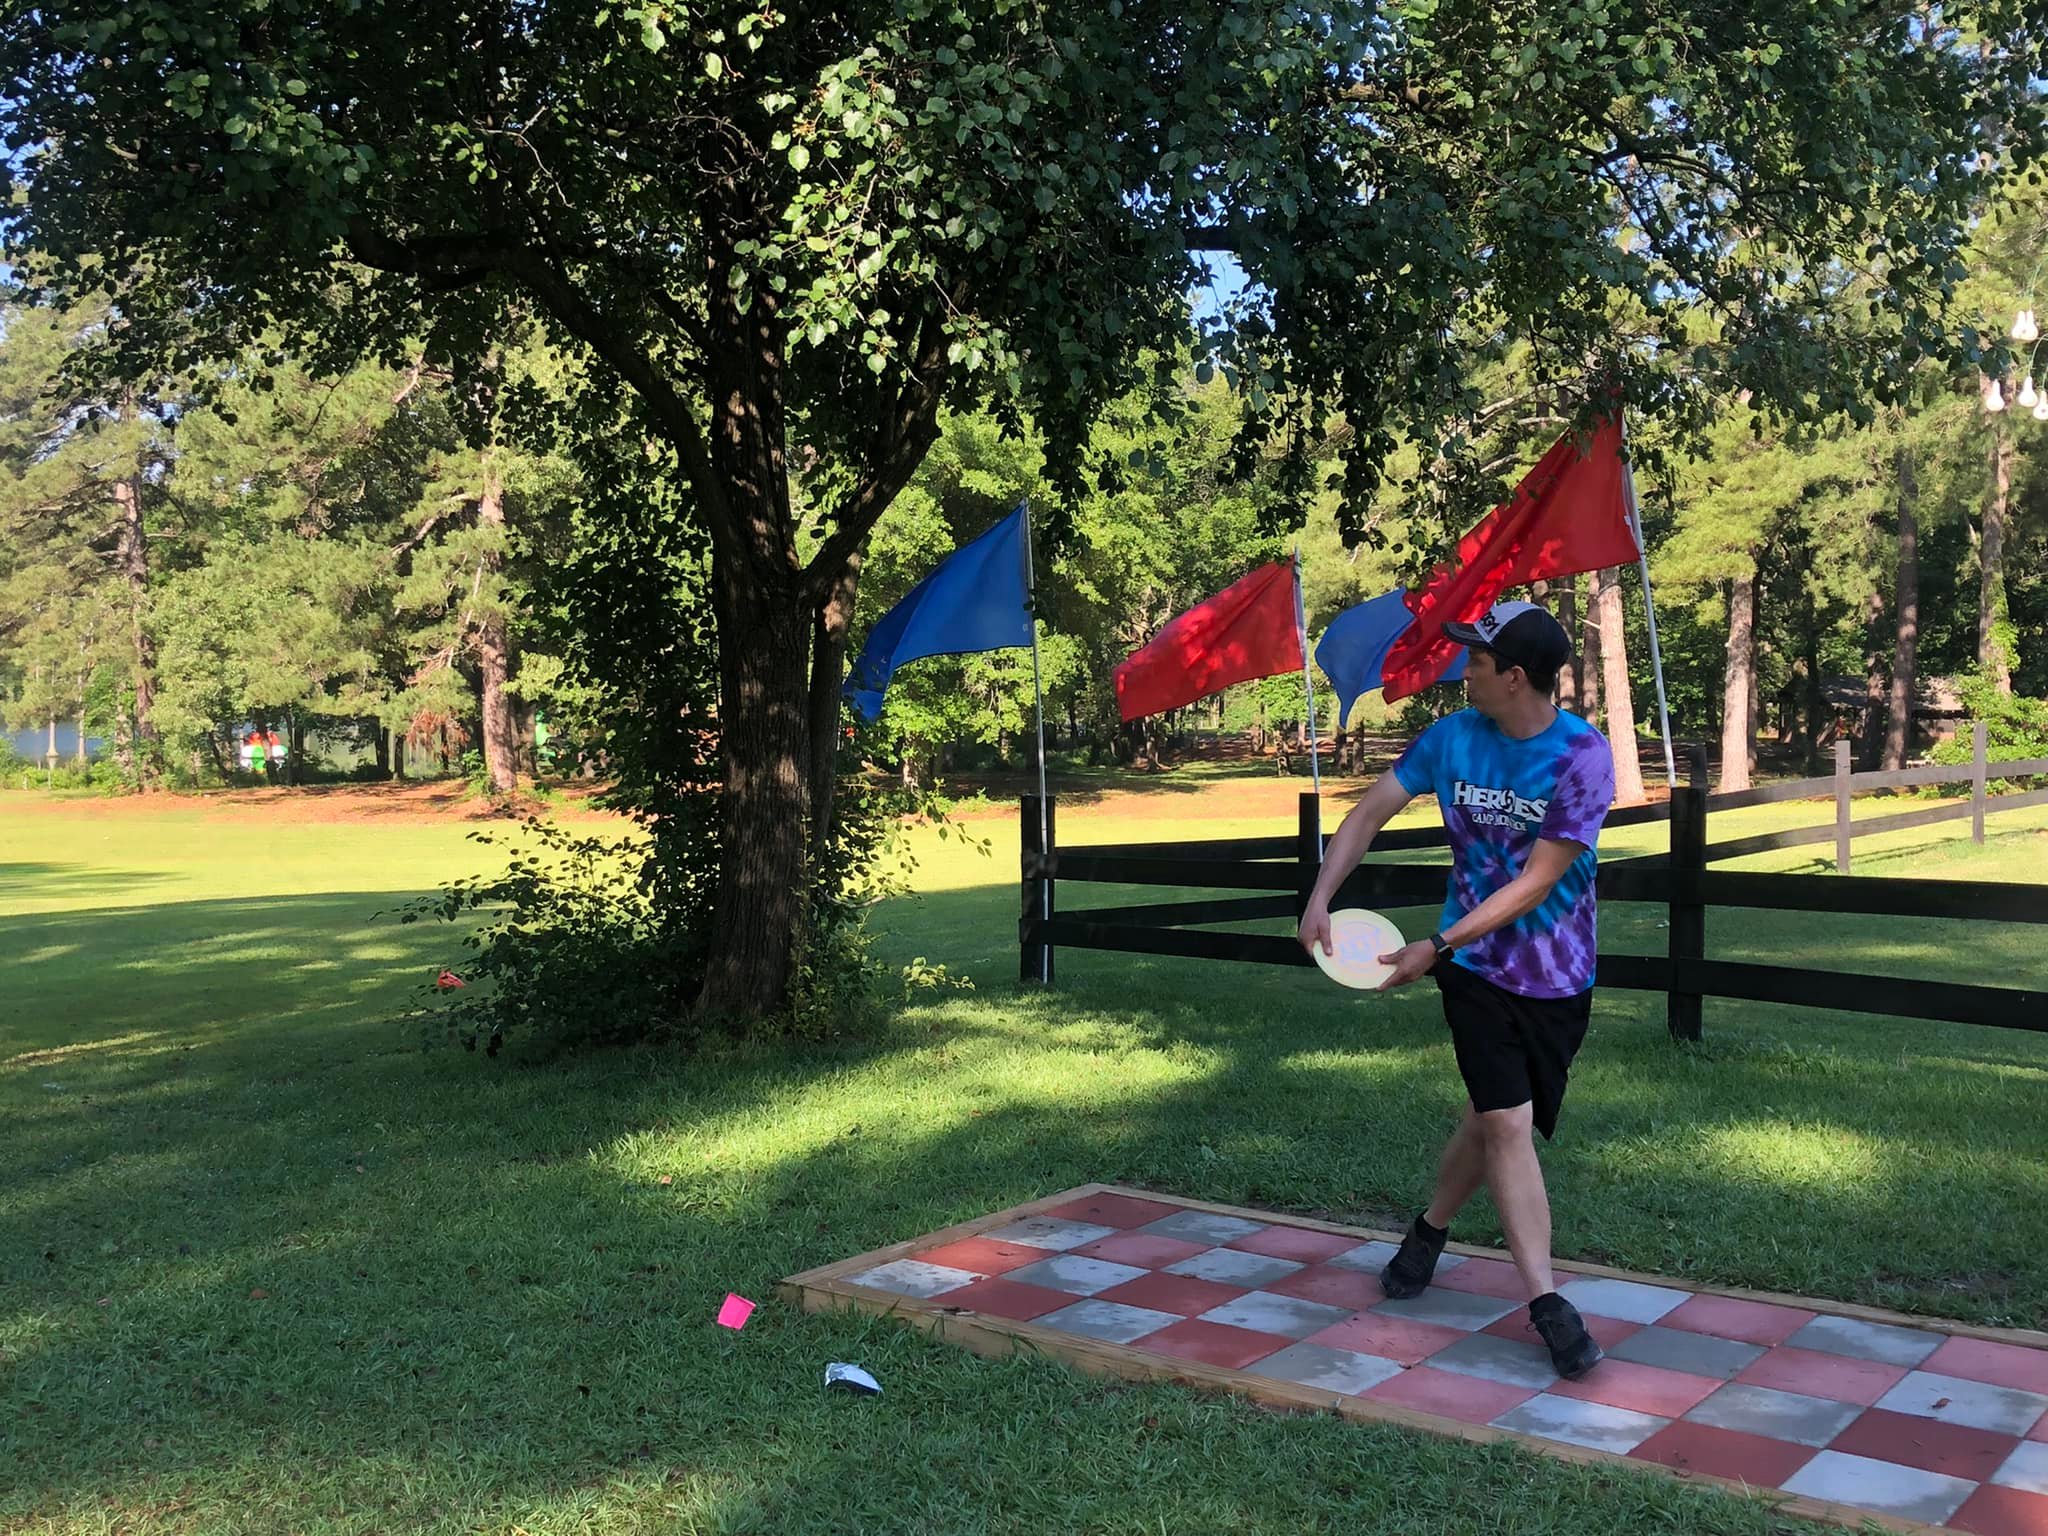 Two 18-hole disc golf courses now open to the public!